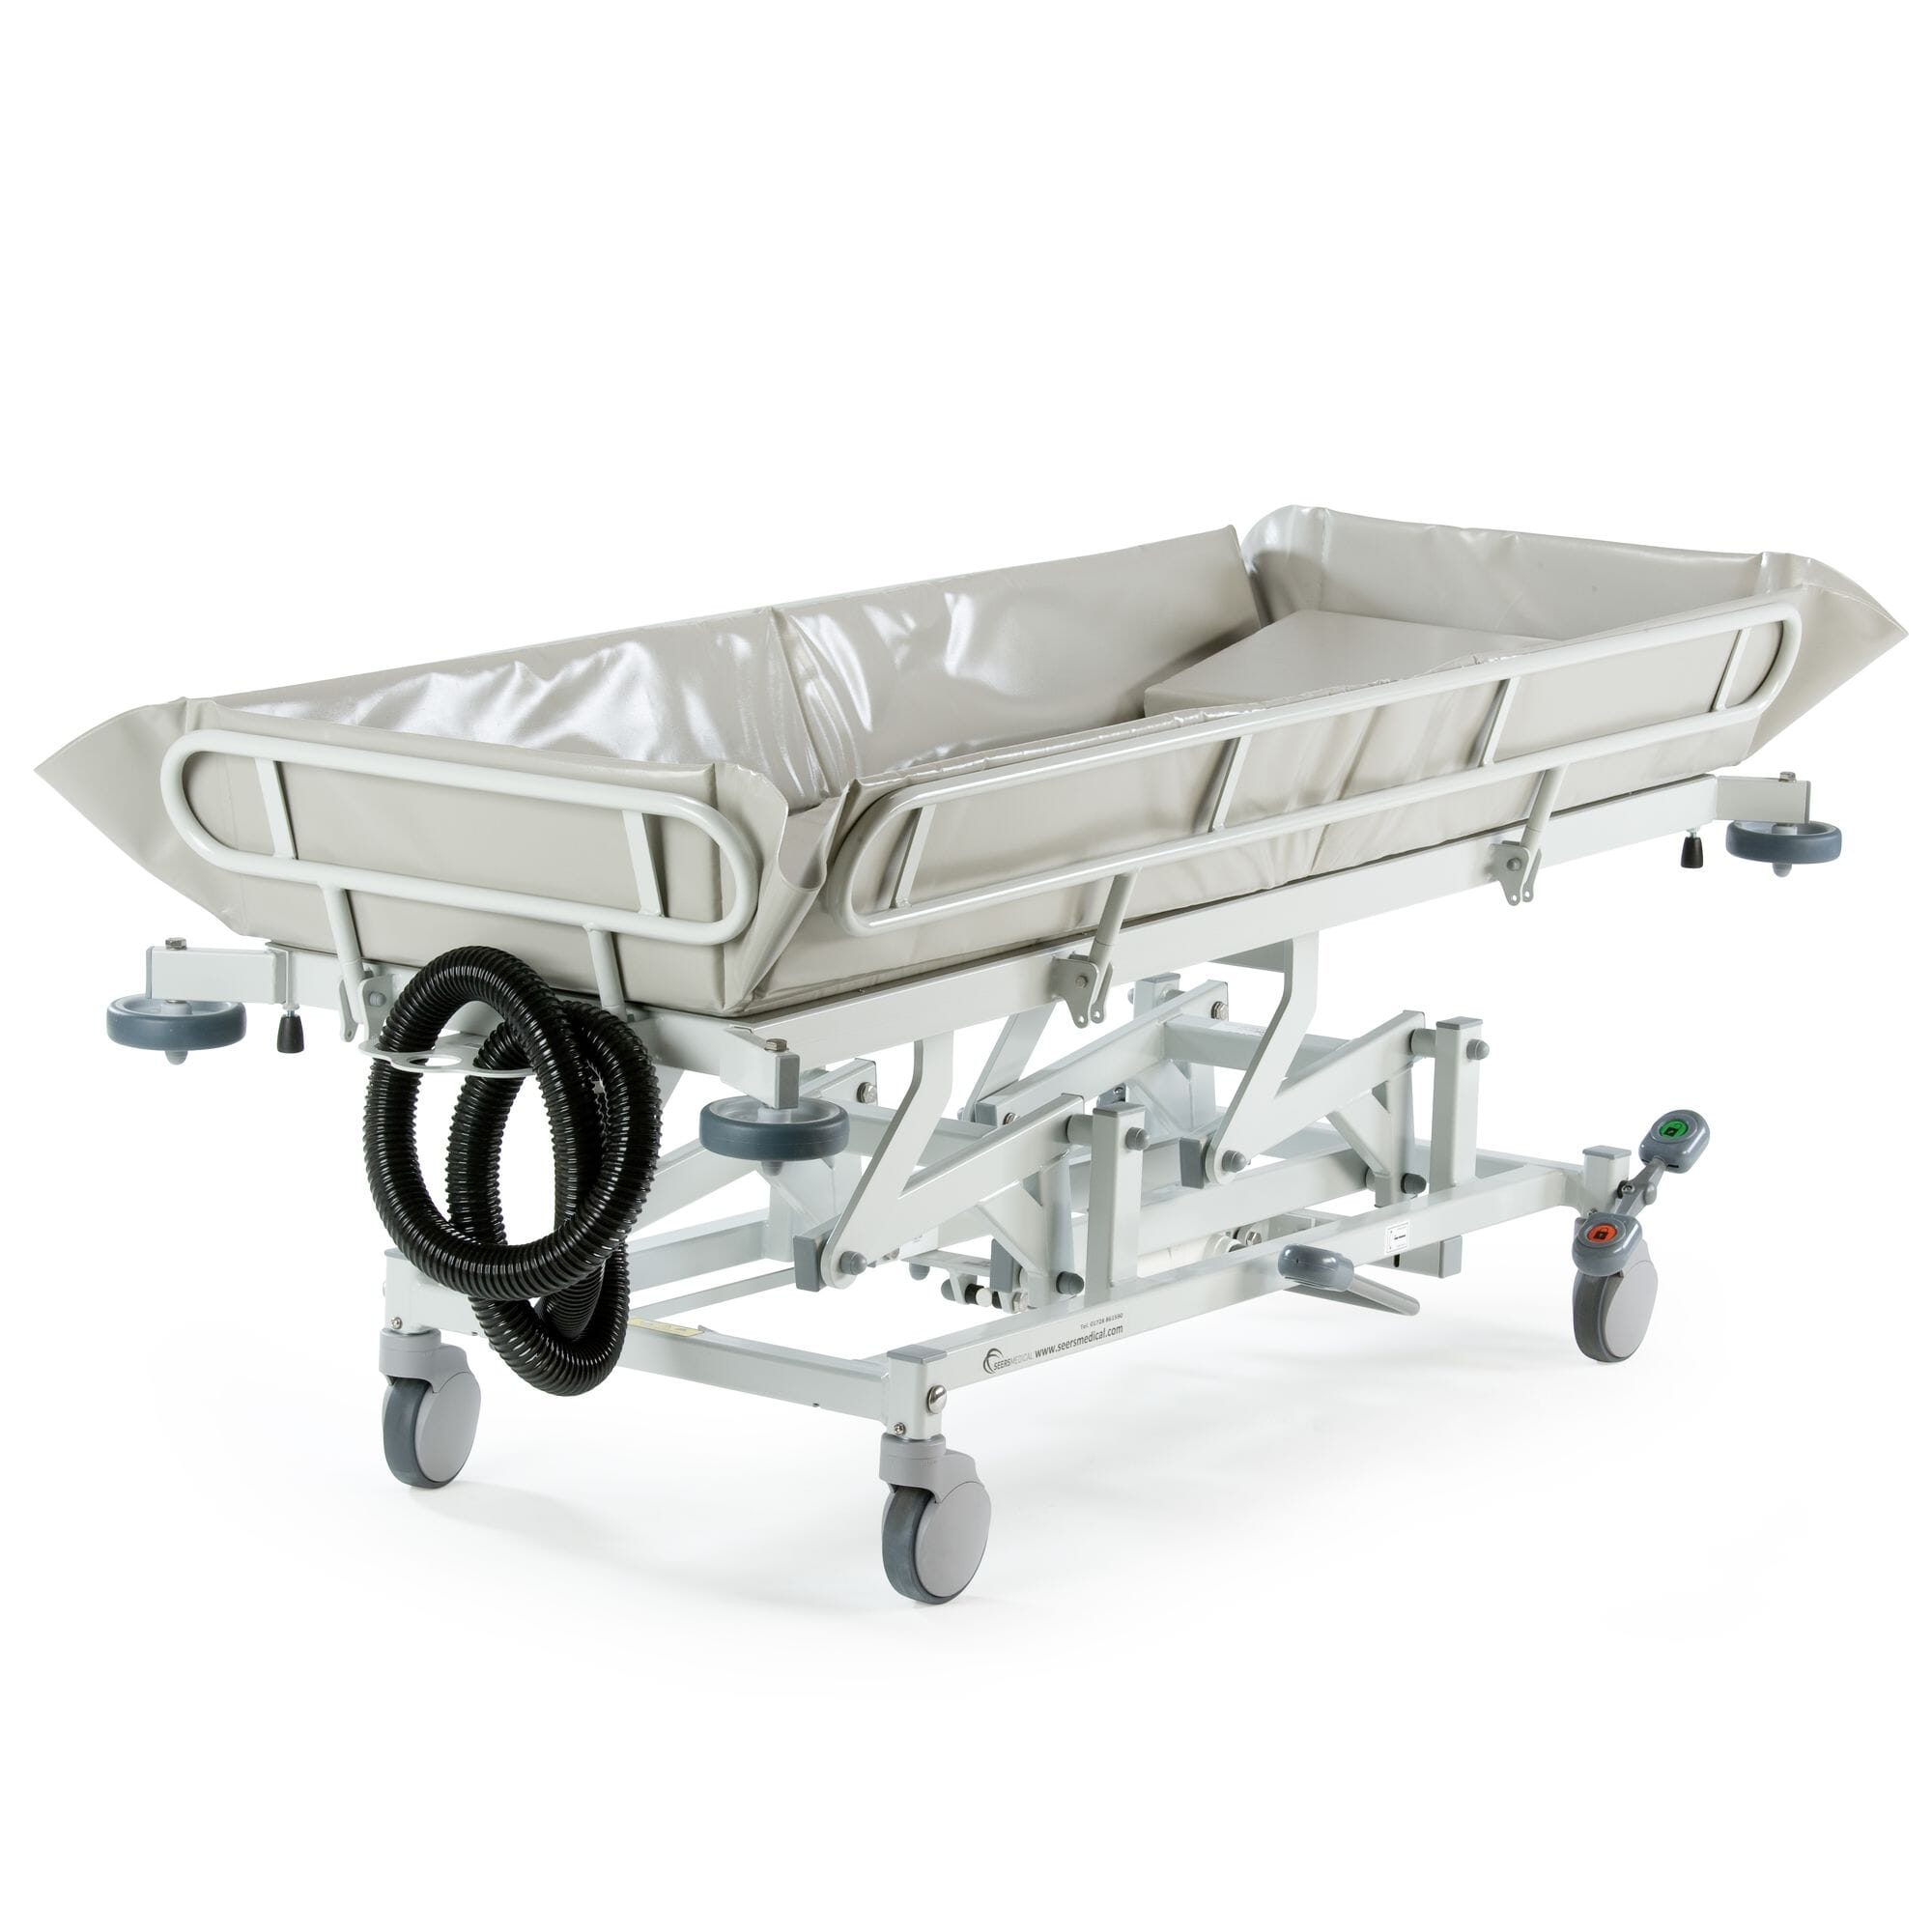 View Medicare HeightAdjustable Shower Trolley Hydraulic information